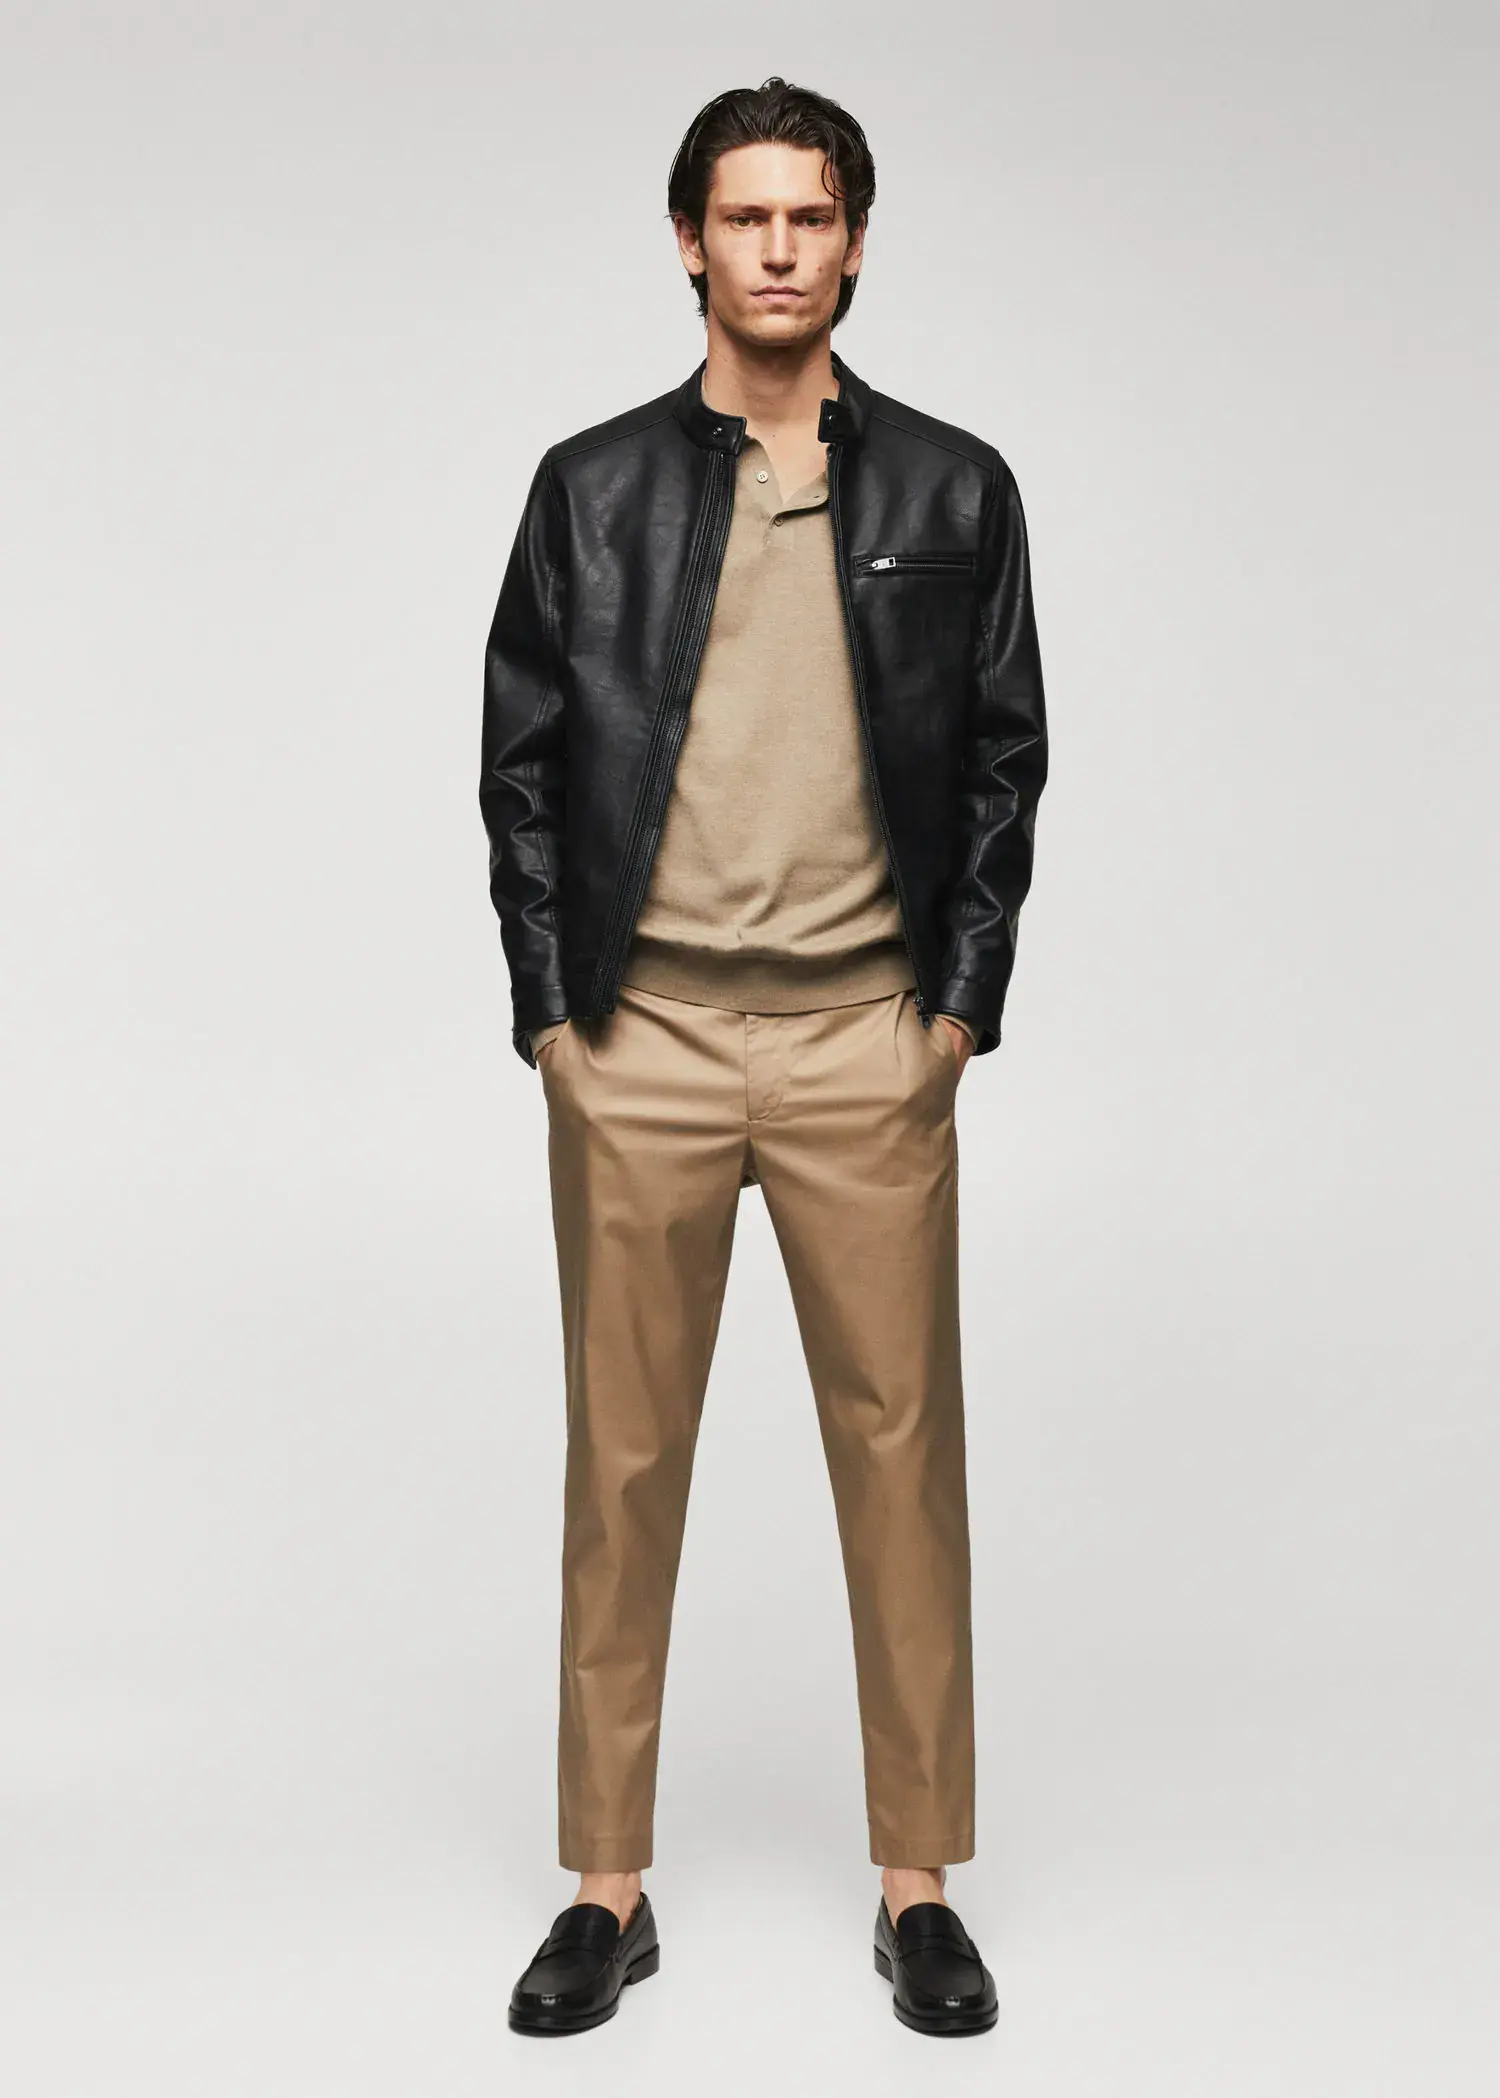 Mango Leather-effect jacket with zips. a man in a black jacket and tan pants. 